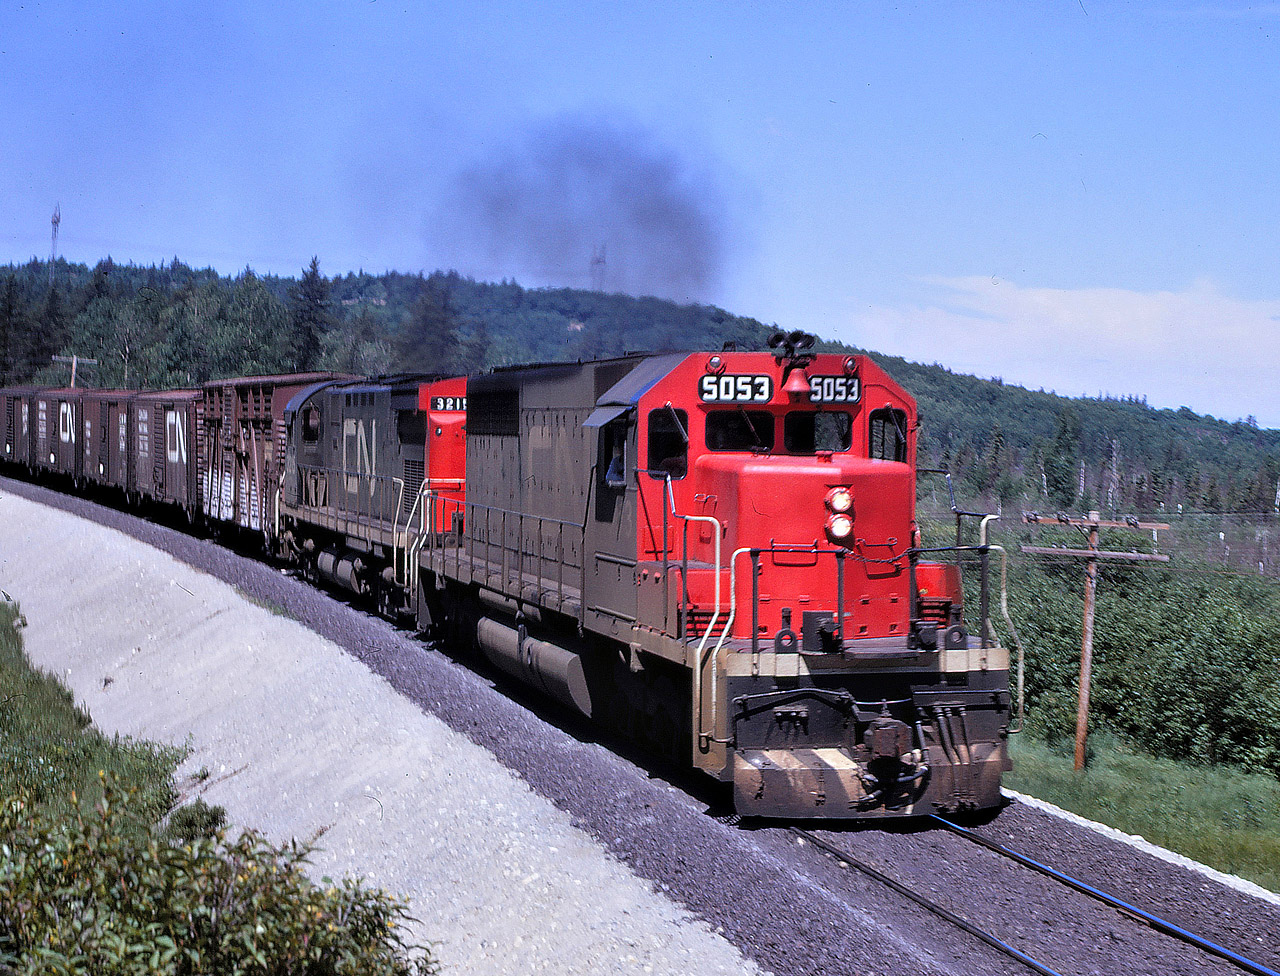 CN train 304, running as time table train 892, heads east out of Capreol on the now abandoned Alderdale Sub on July 2, 1970. The train has SD40 5053 leading C-424 3215 which was a common power arrangement at the time.  Even though heavy maintenance is evident in this picture, the line was abandoned some 20 year later.